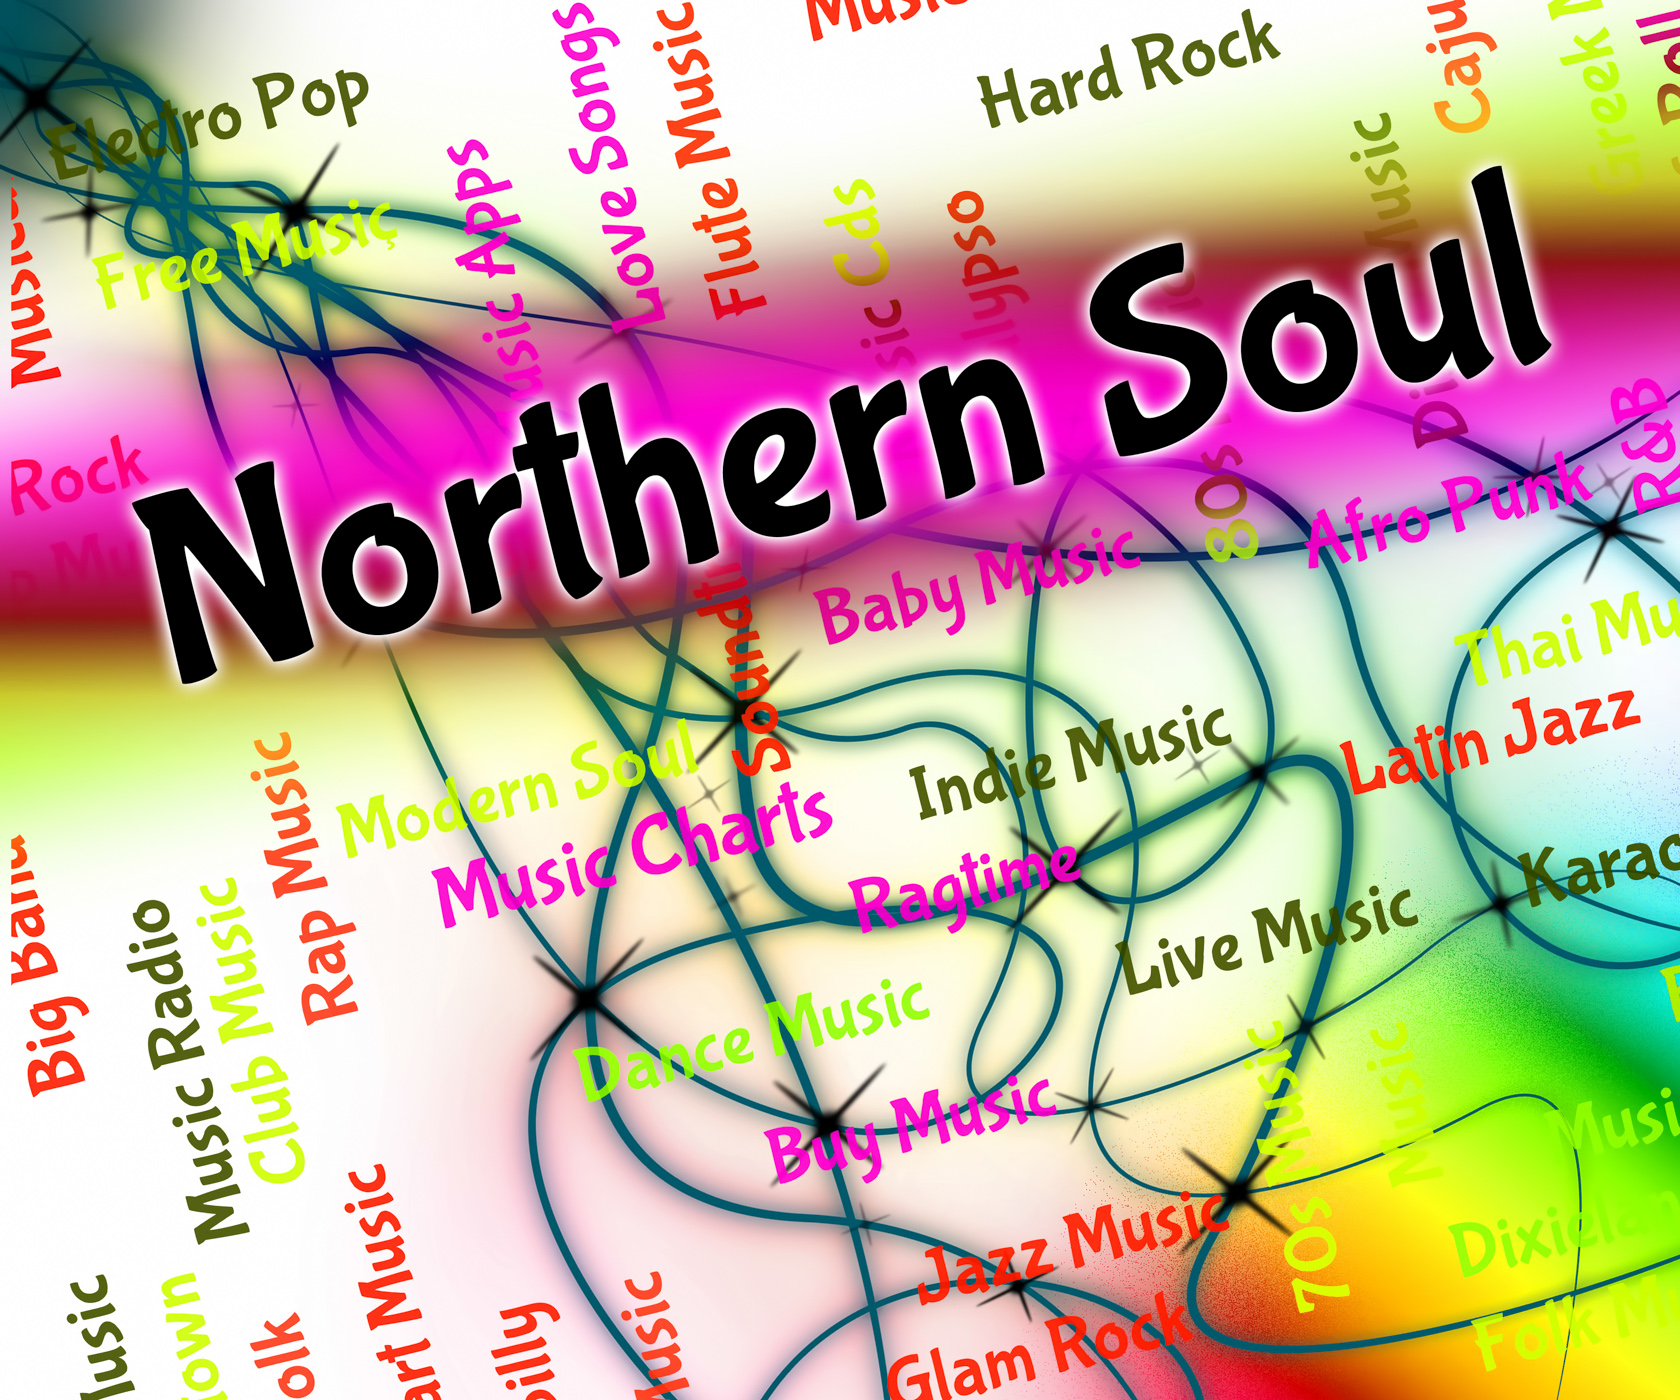 Northern soul means rhythm and blues and atlantic photo